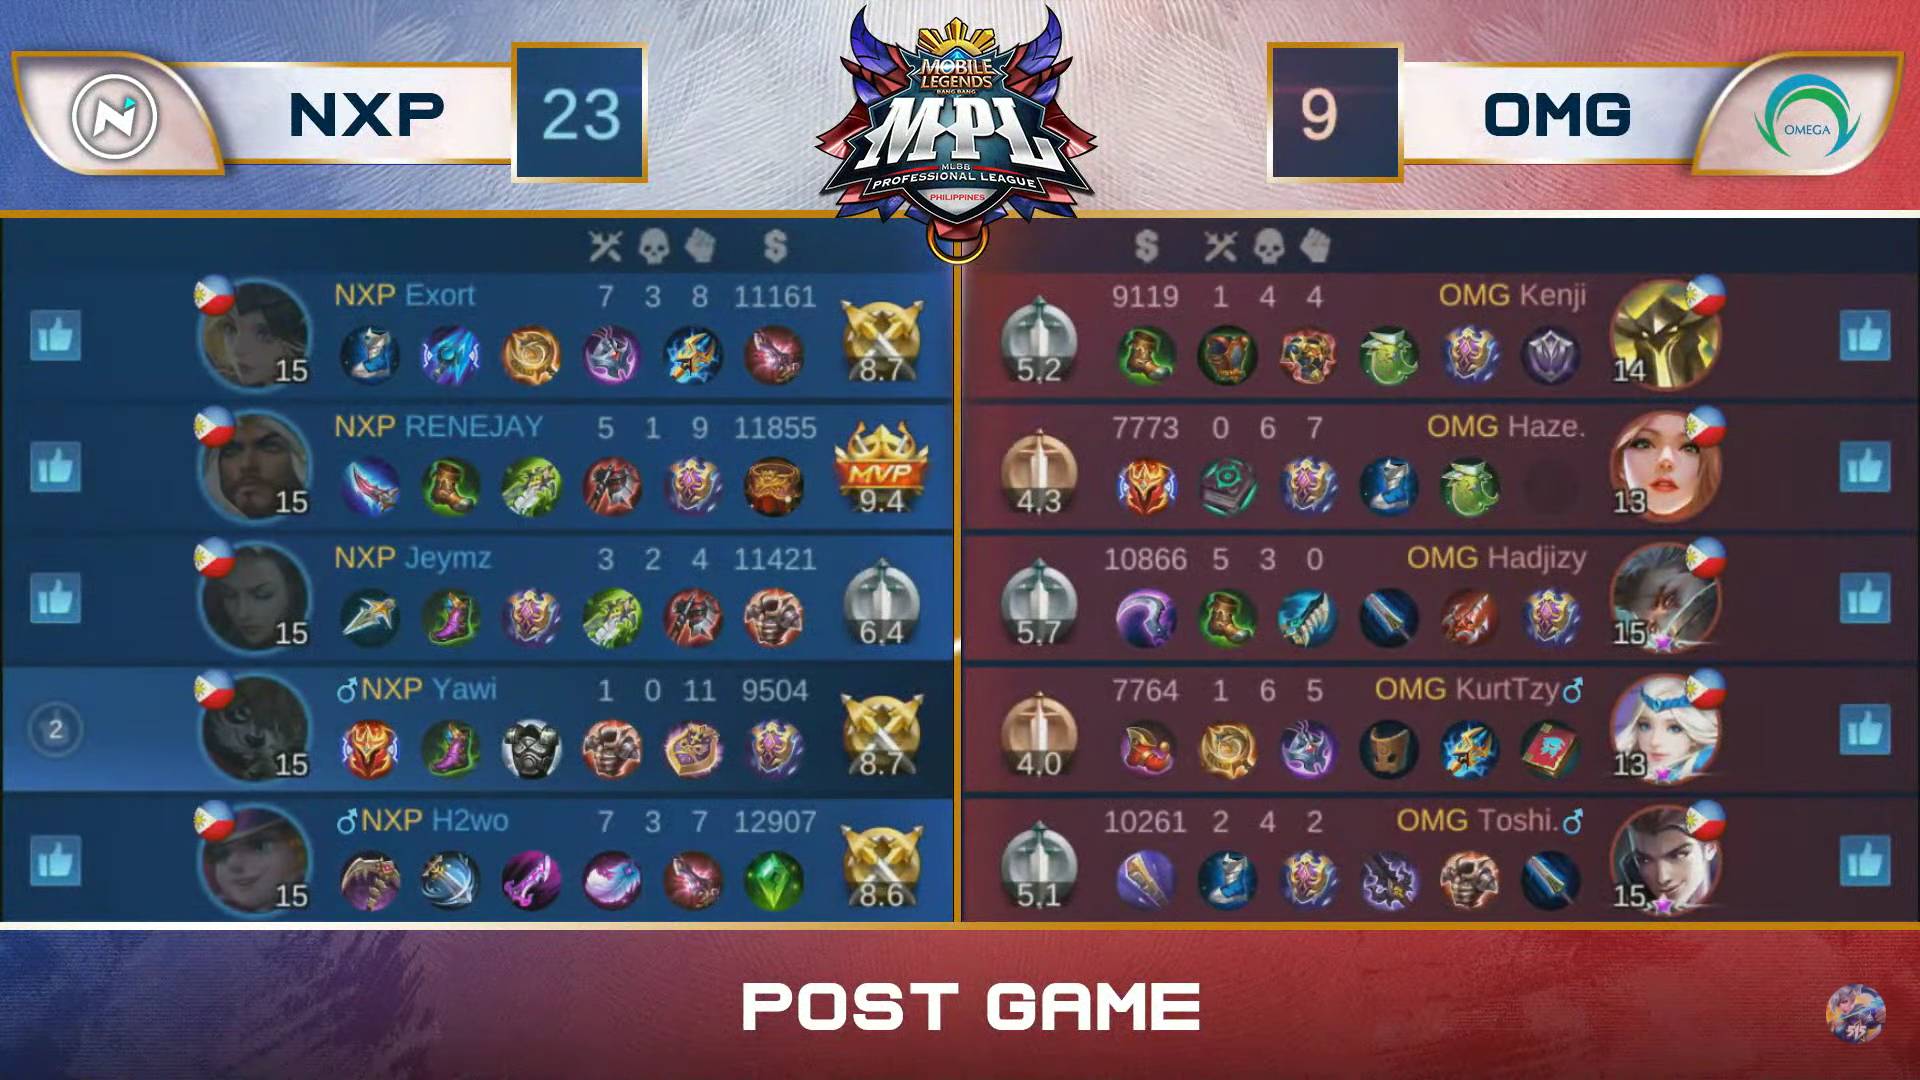 MPL-PH-Season-7-Nexplay-def-Omega-Game-1 H2wo, RENEJAY steal Game Two as Nexplay sweeps skidding Omega in MPL PH ESports Mobile Legends MPL-PH News  - philippine sports news